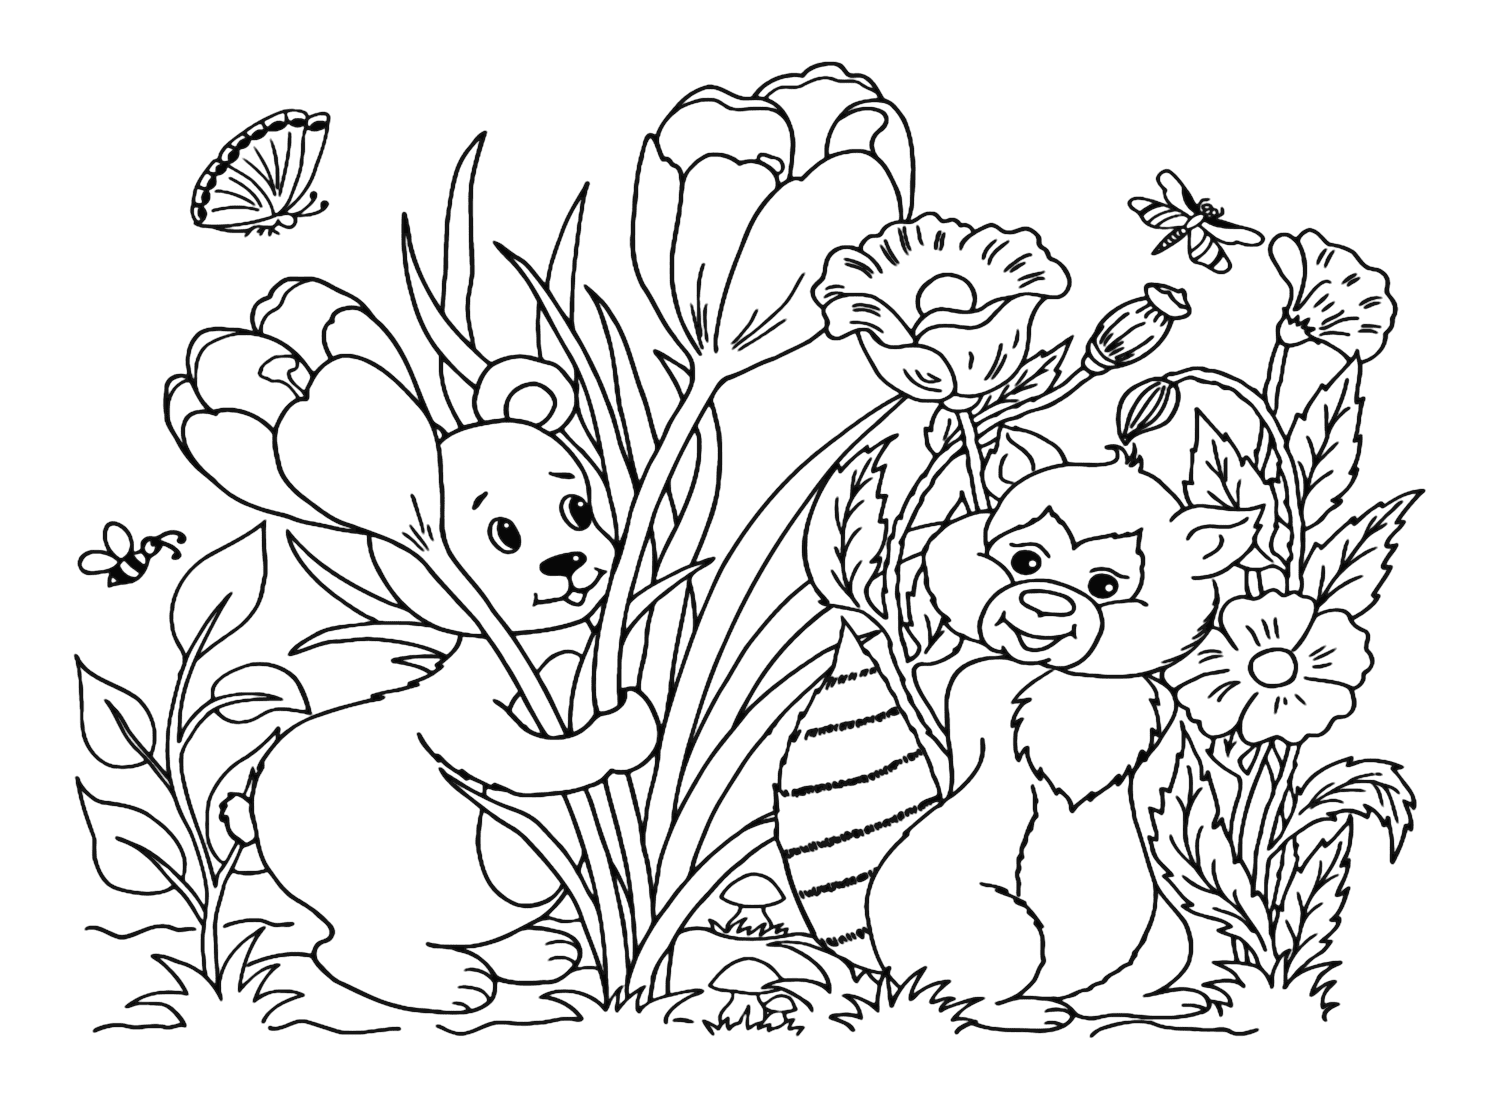 Badger With Bear Coloring Page from Badger